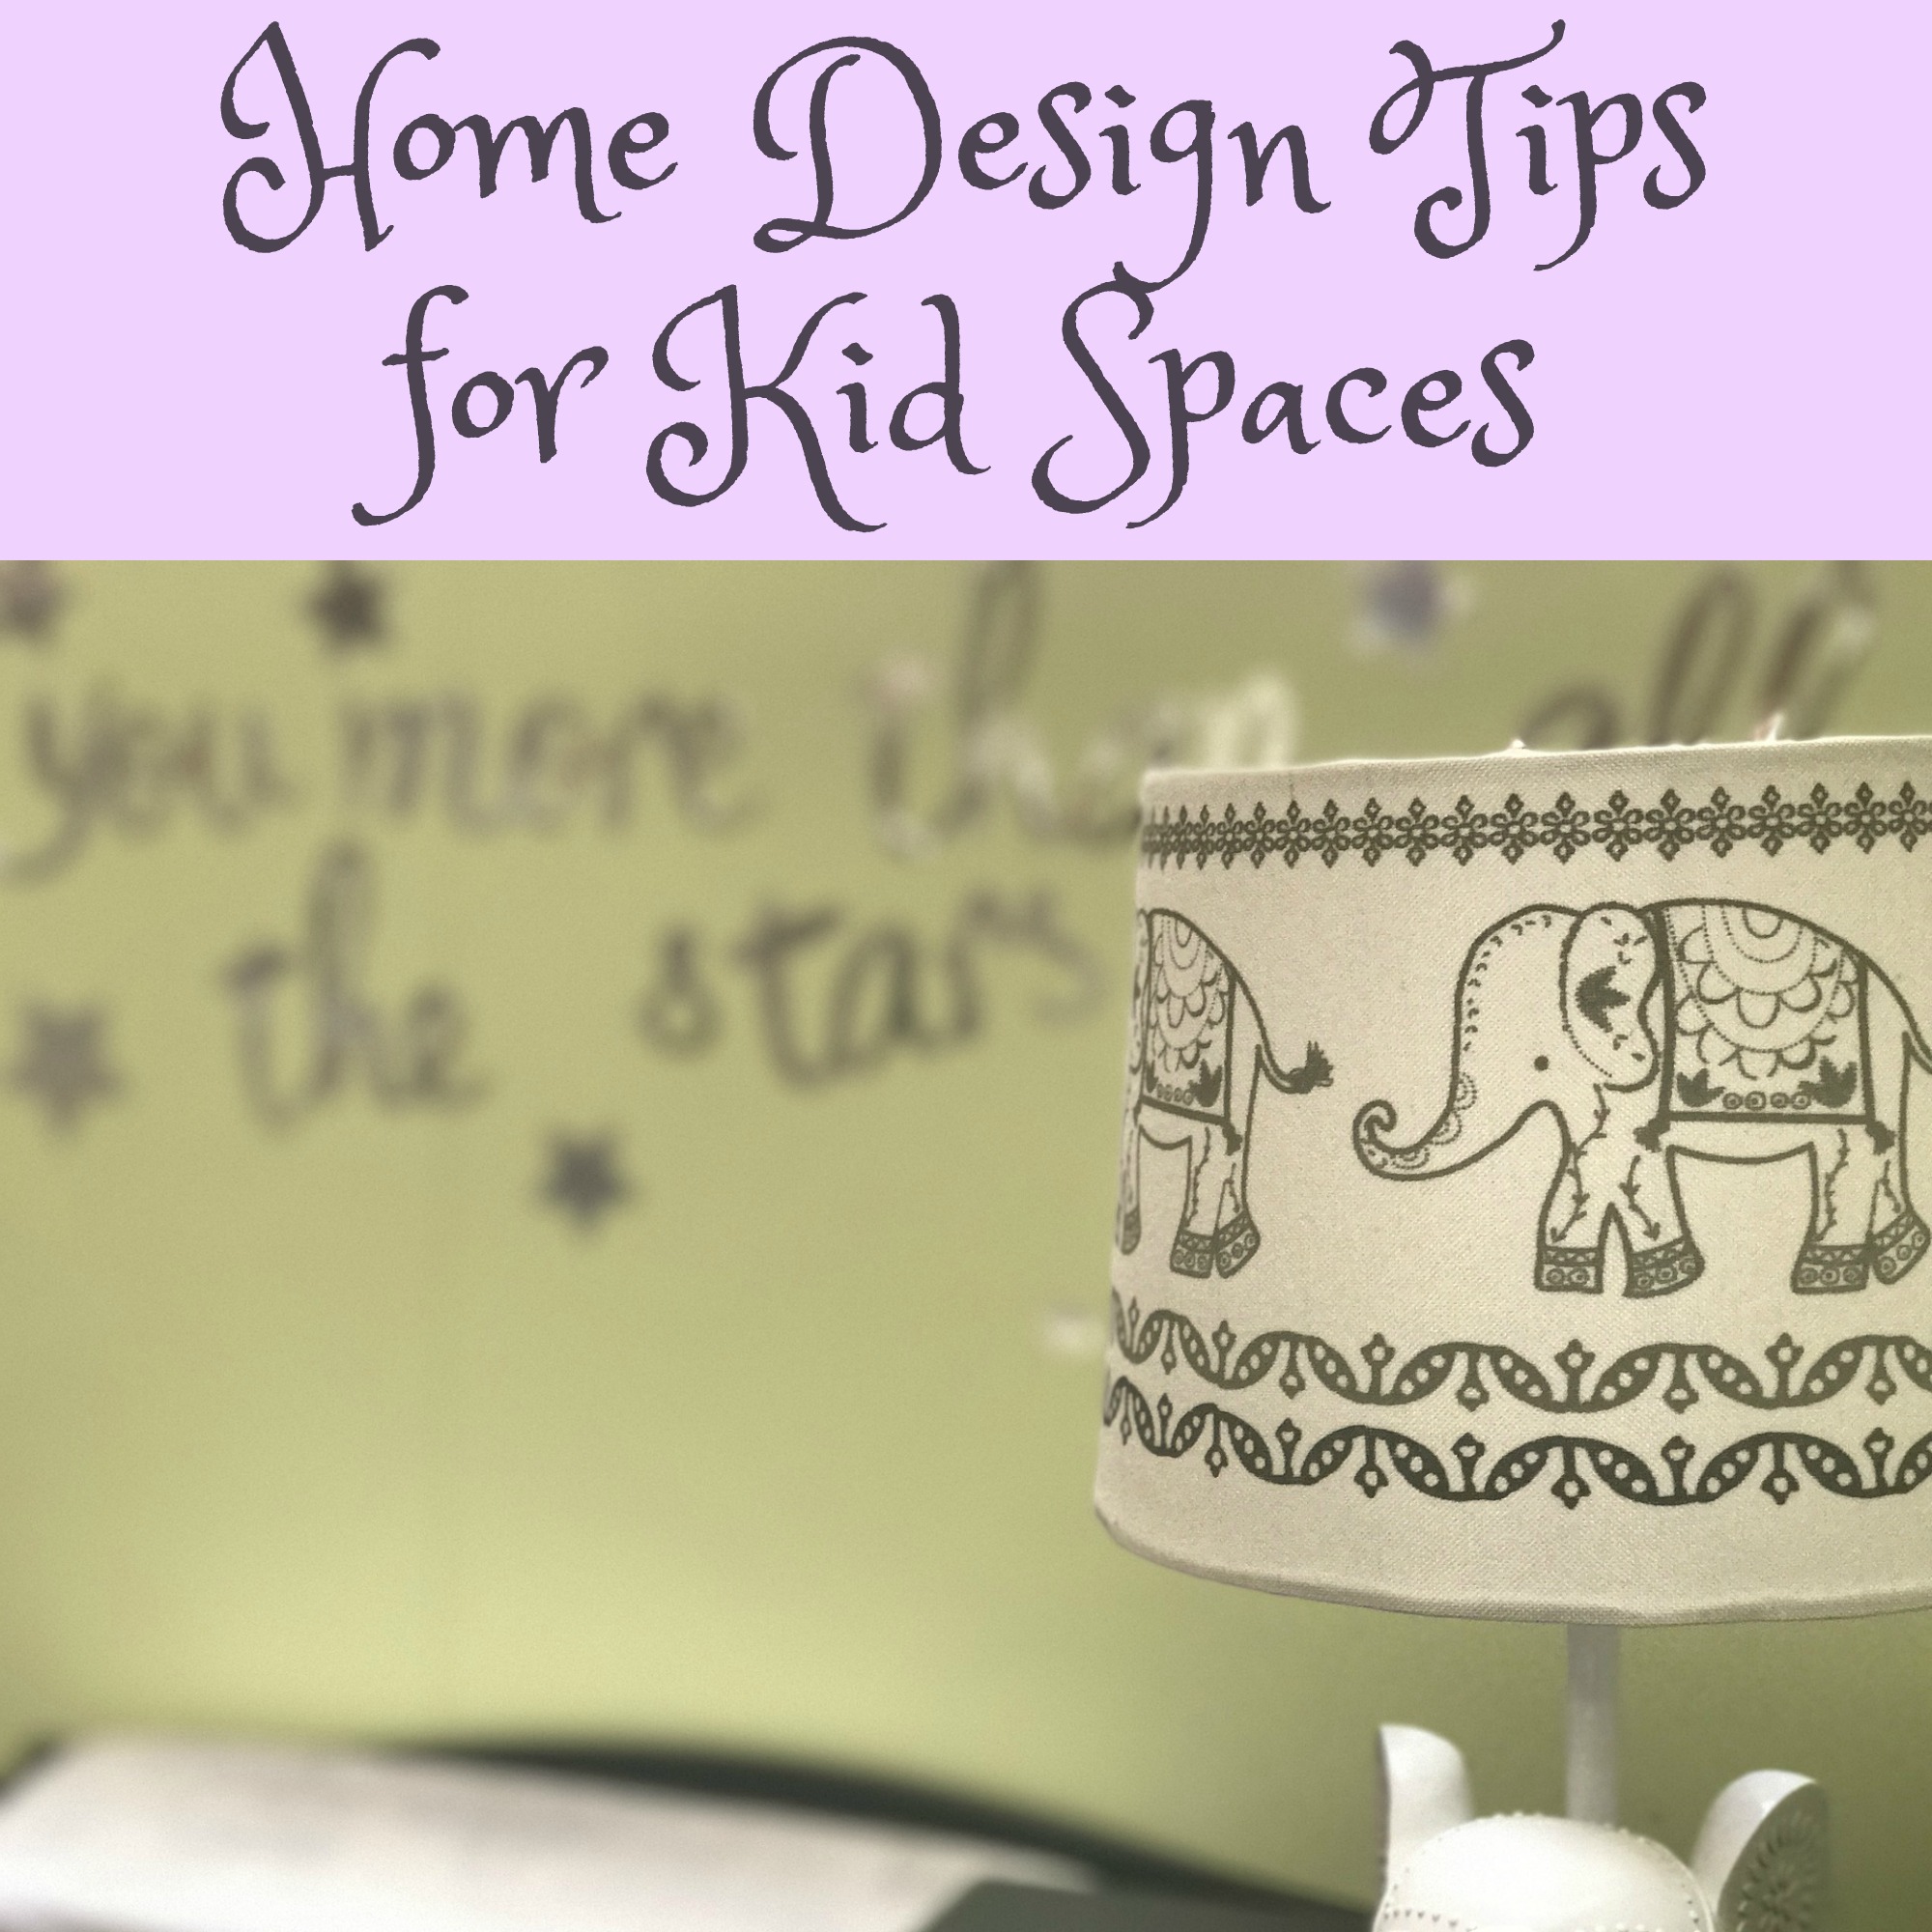 Home Design Tips for Kid Spaces